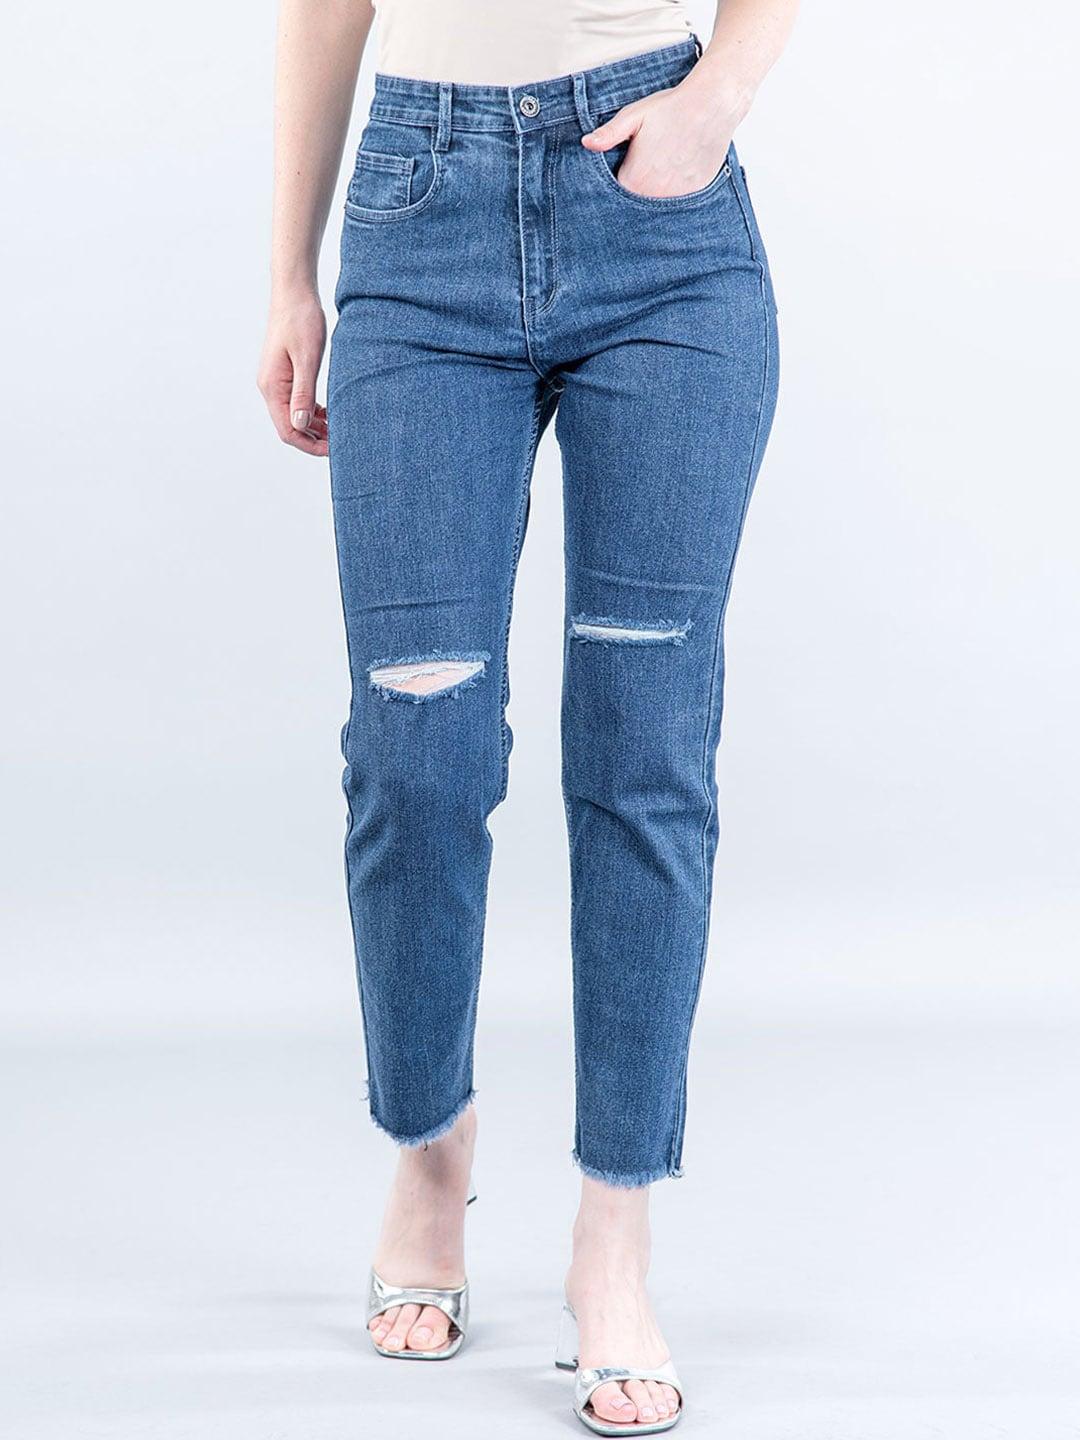 tistabene-women-comfort-low-distress-stretchable-jeans